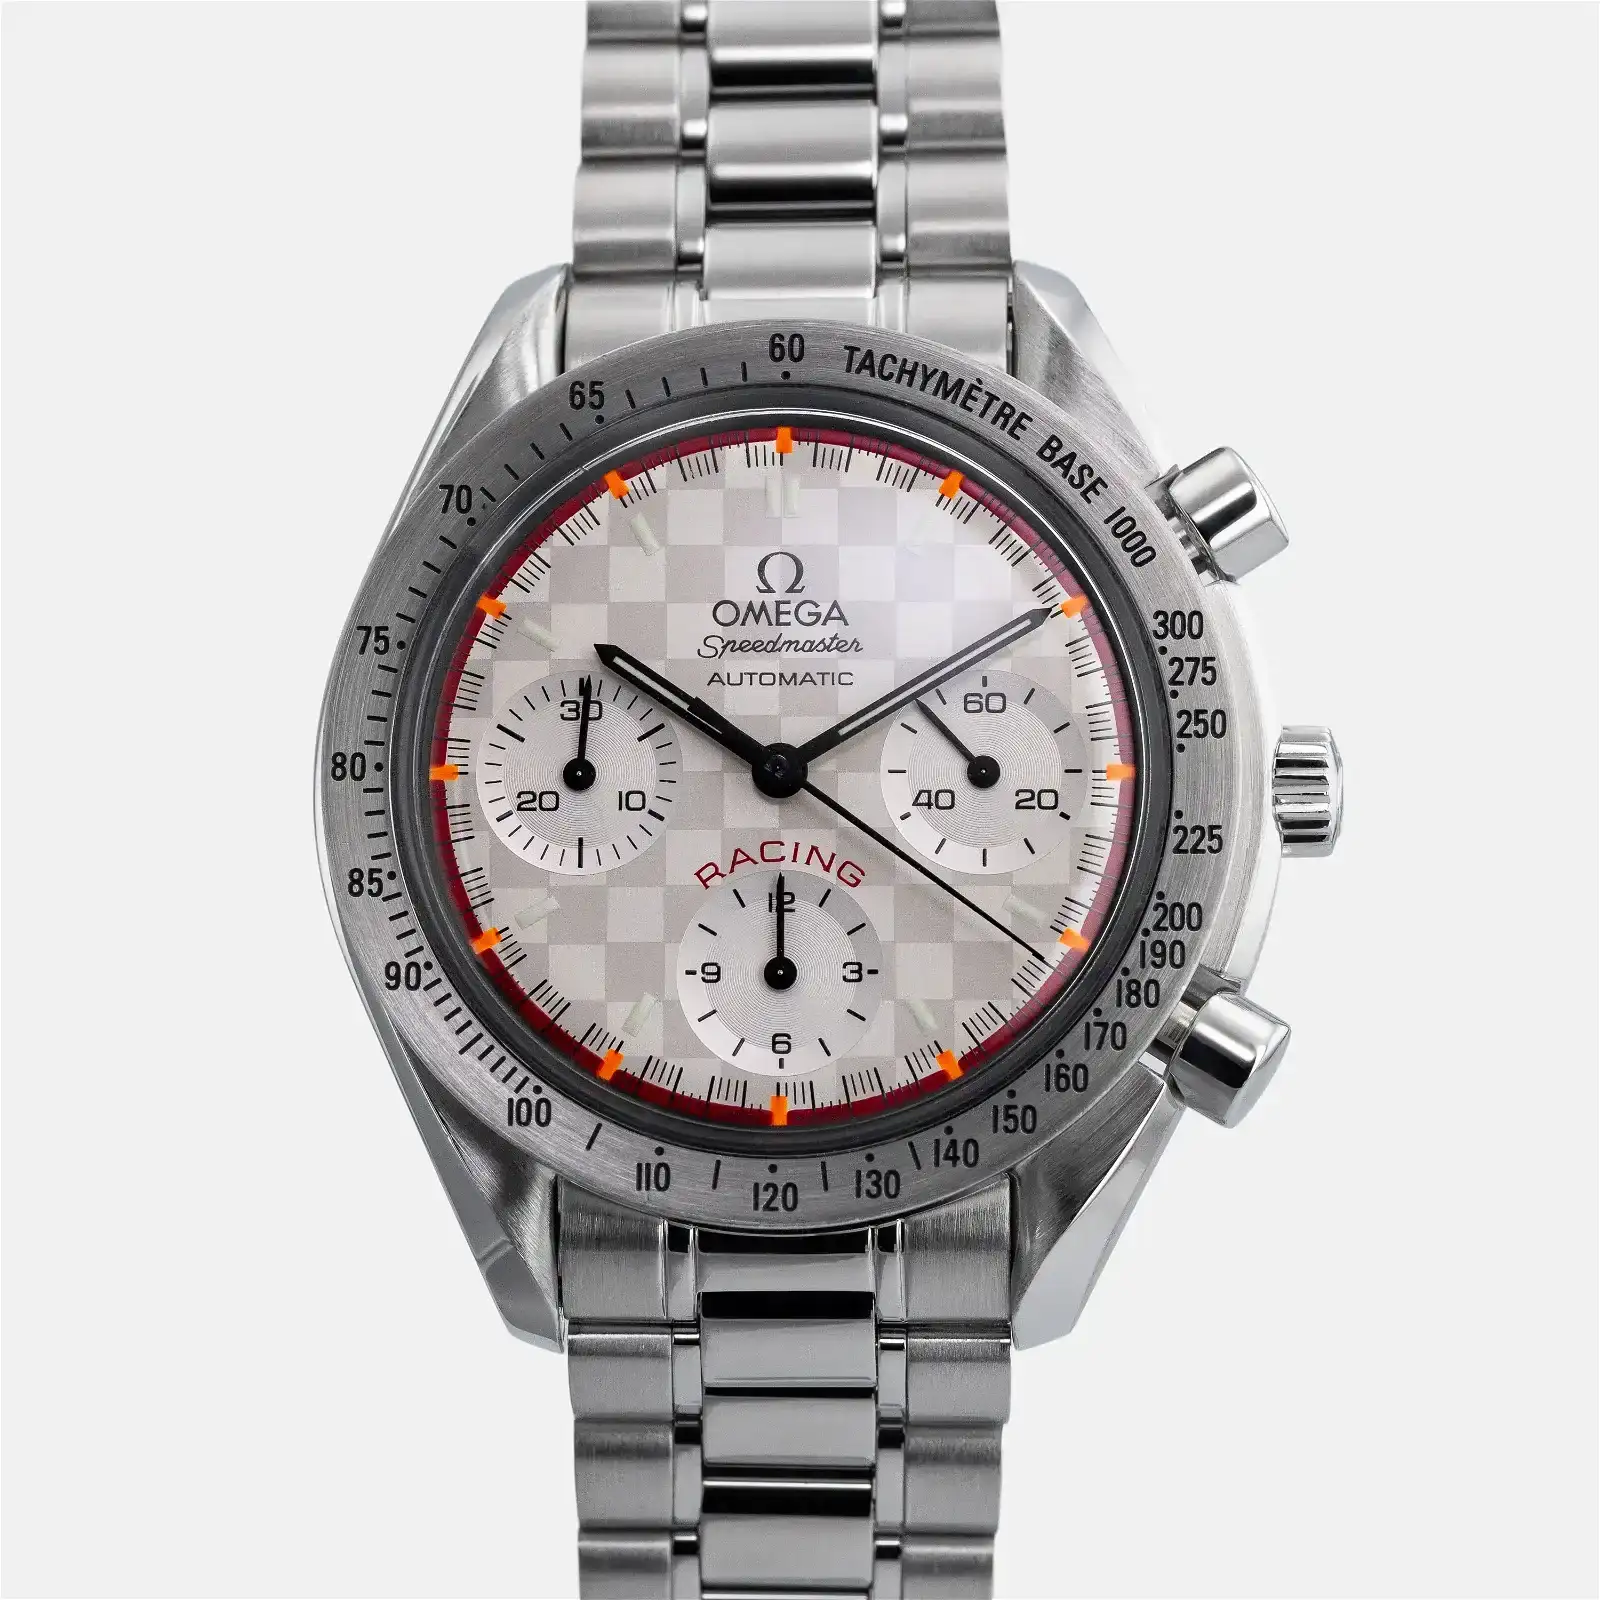 Image of OMEGA Speedmaster Reduced Michael Schumacher Racing Chronograph Limited Edition 3517.30.00